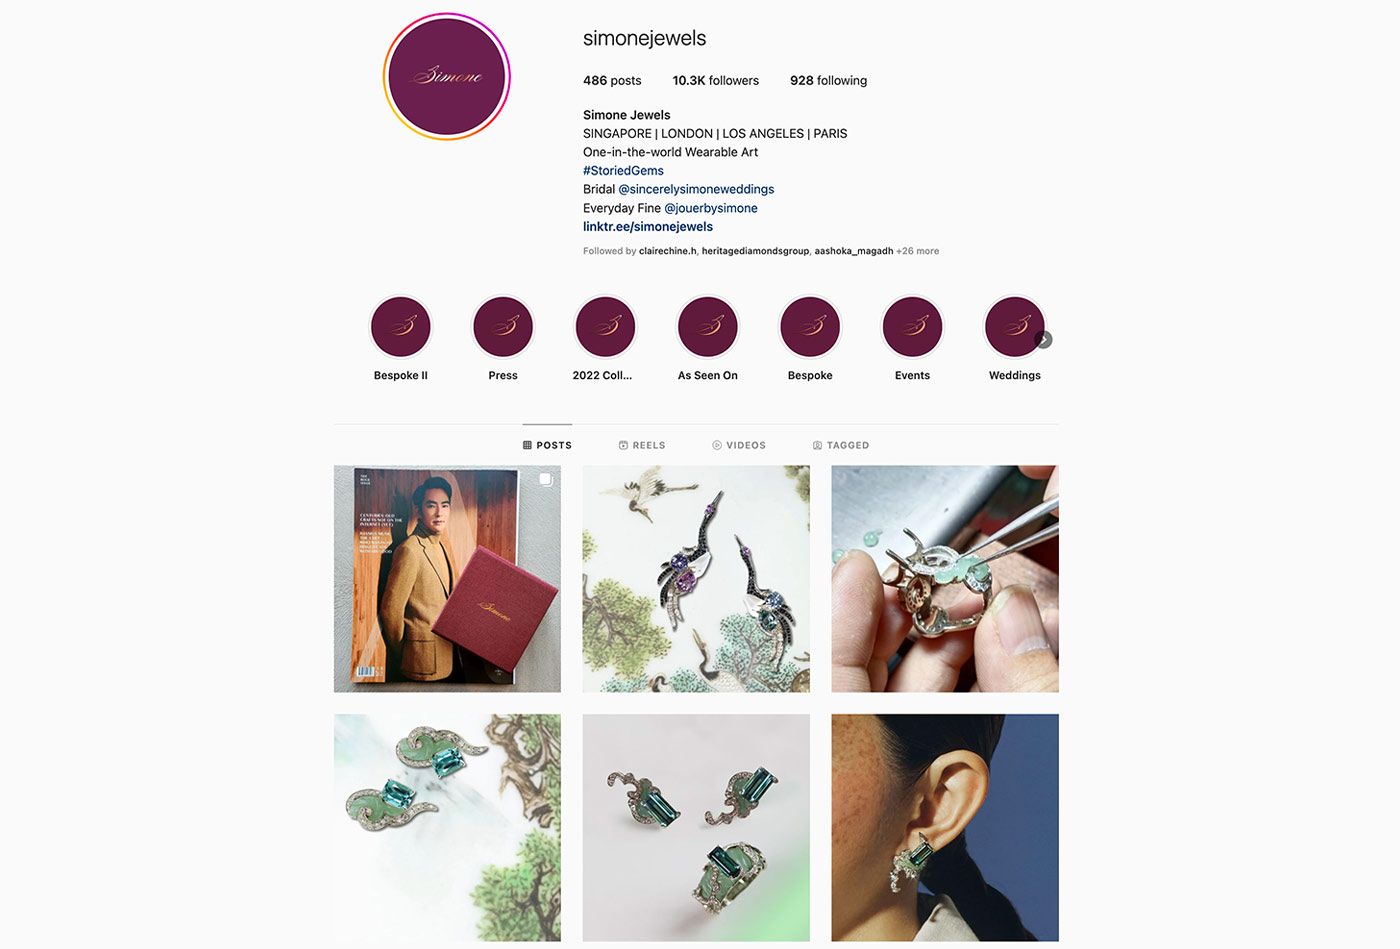 Discover Simone Jewels on Instagram